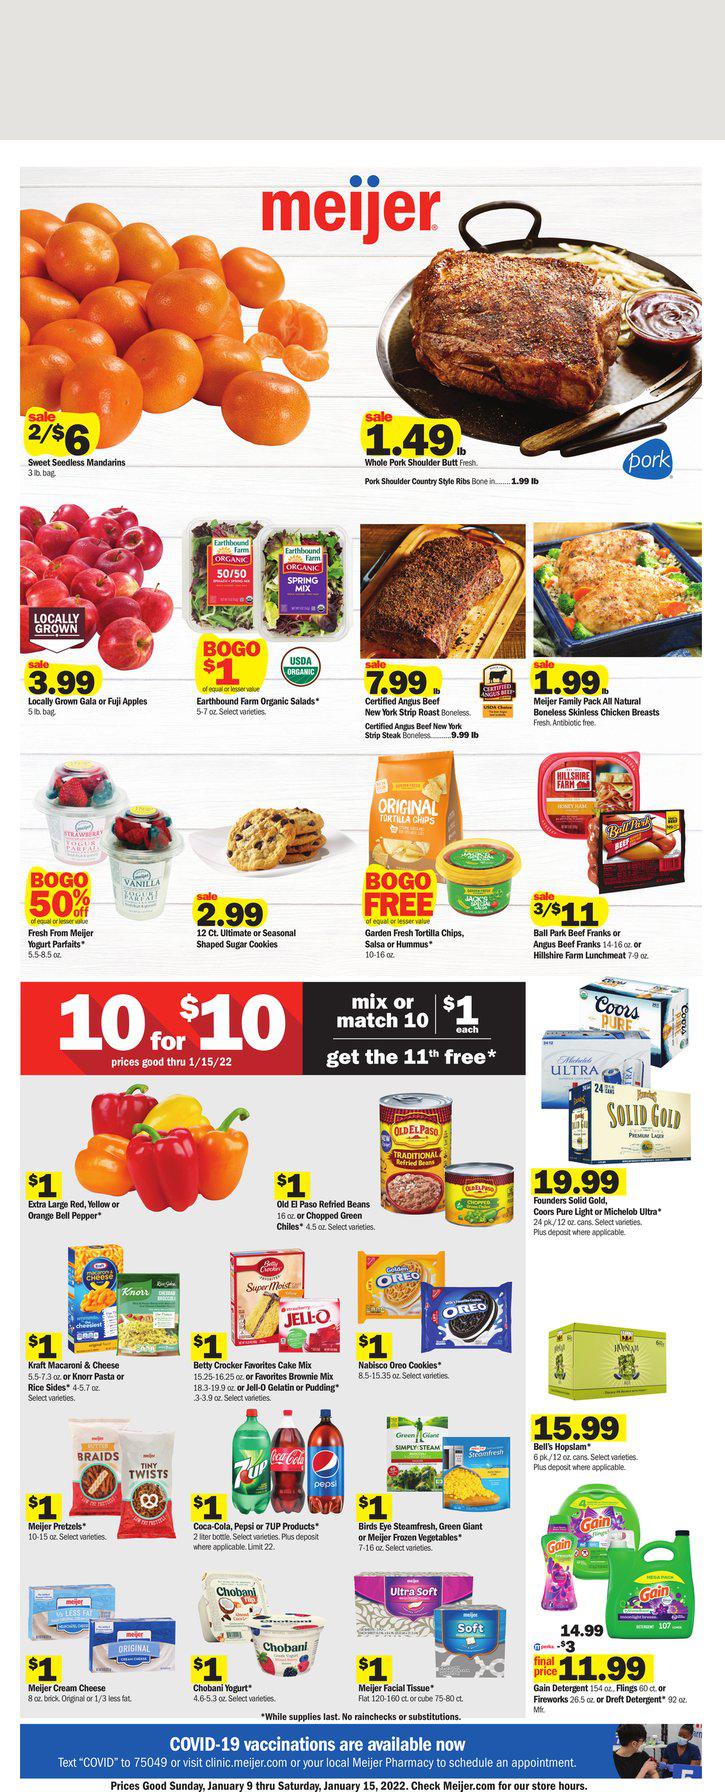 09.01.2022 Meijer ad 1. page